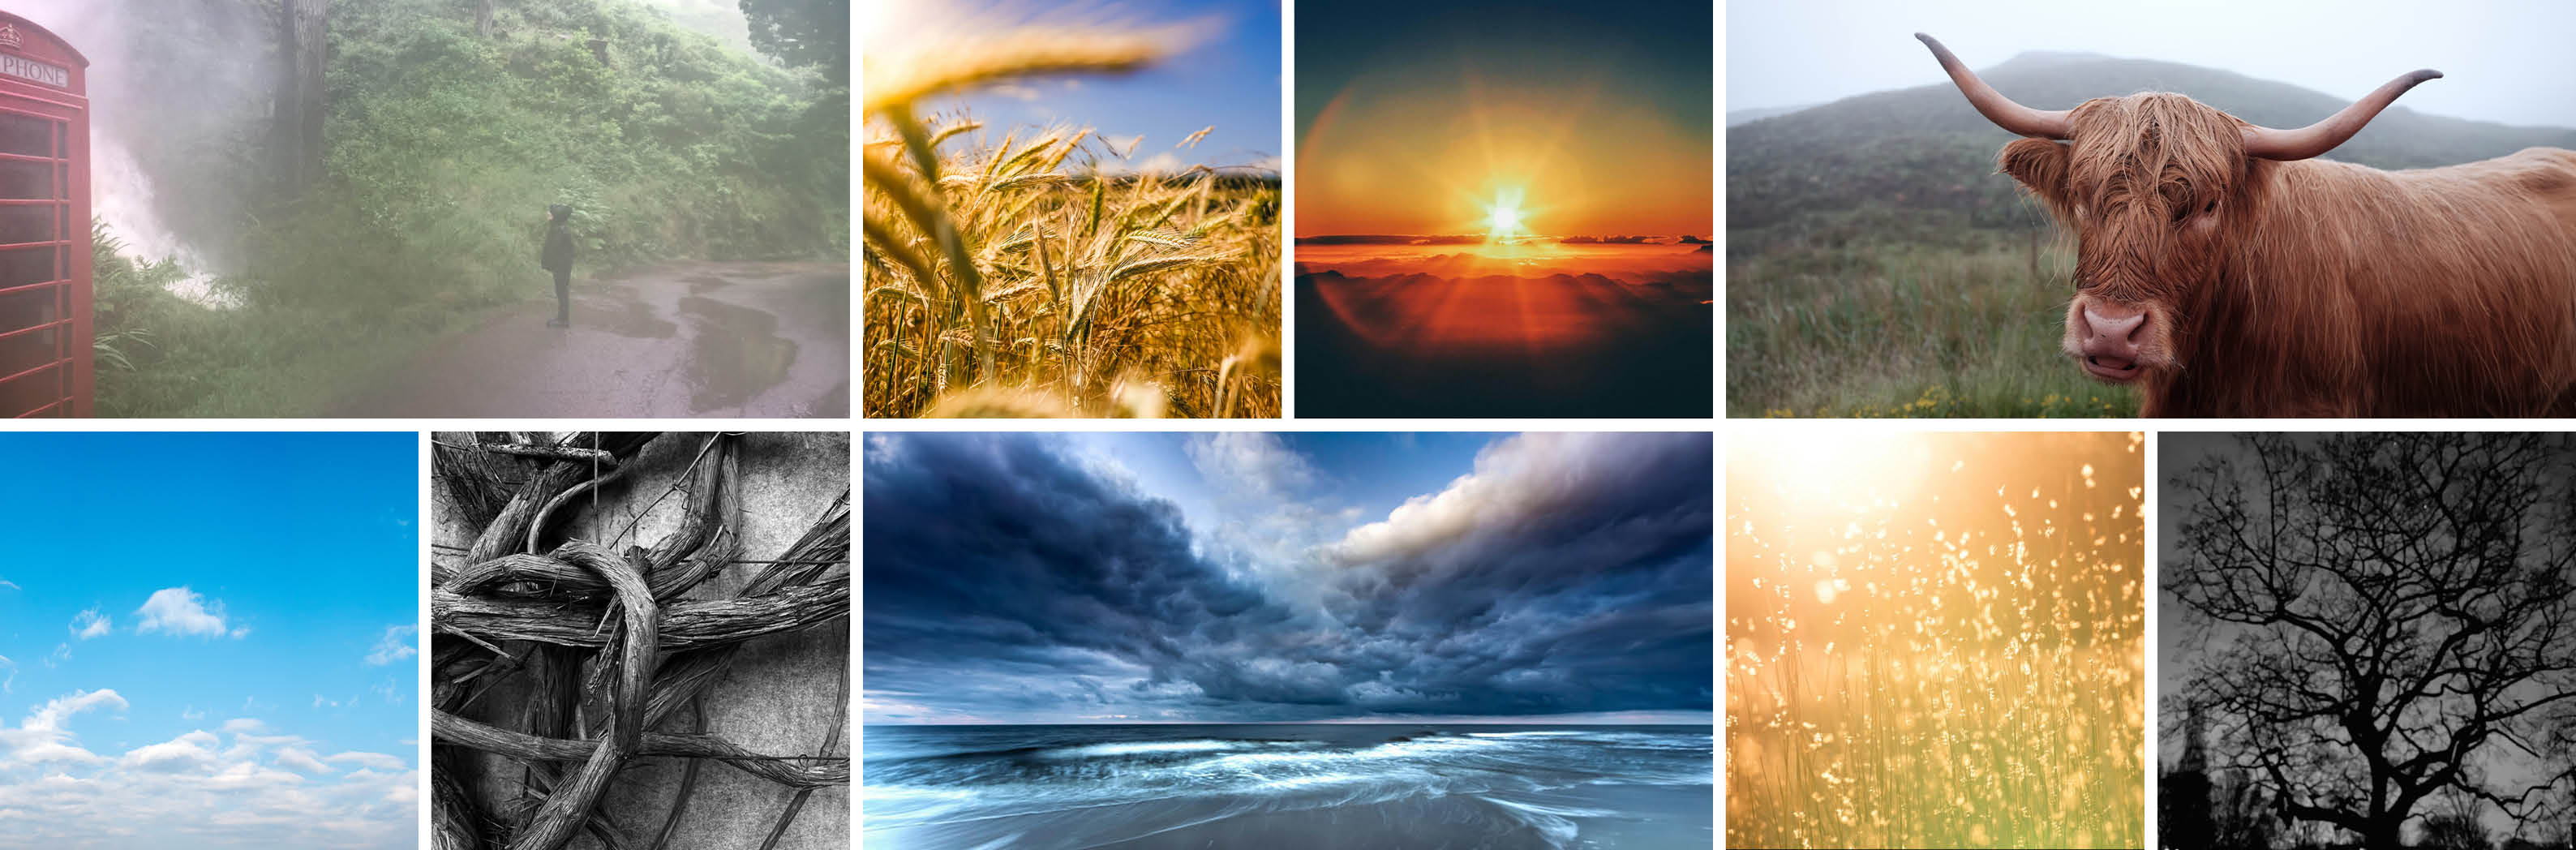 Grid of photographs showing rural Scotland in various weather and lighting conditions